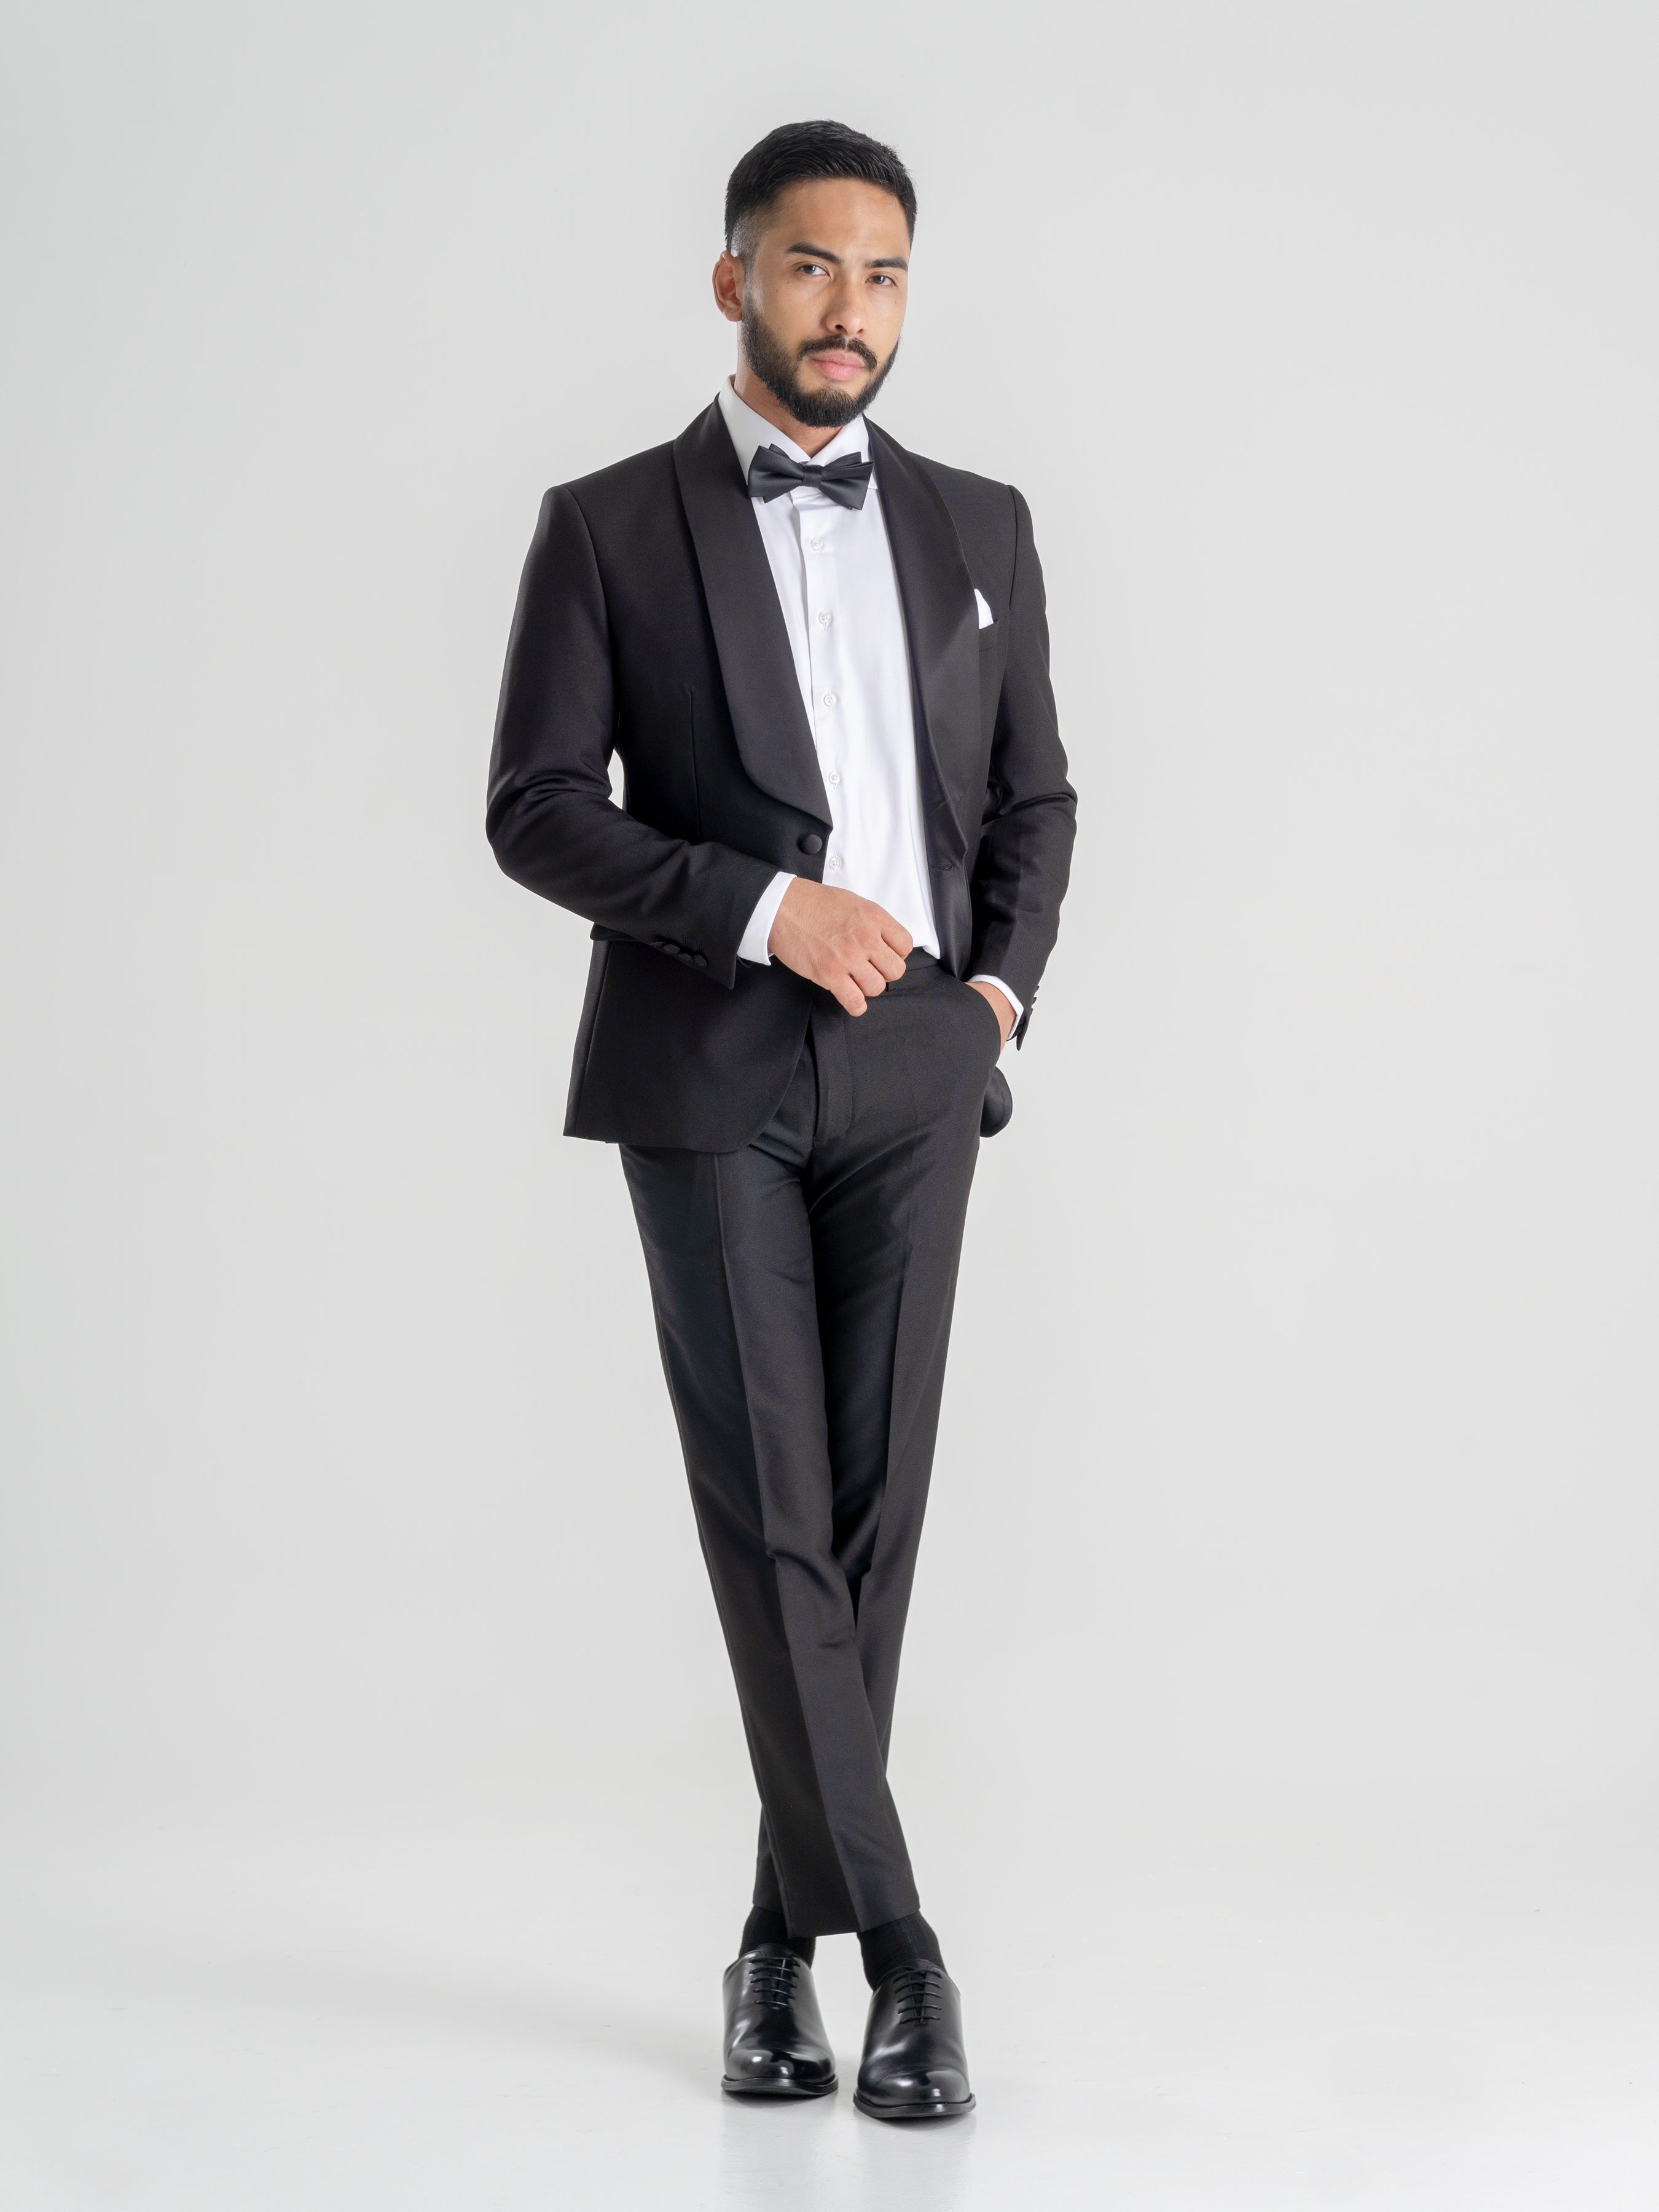 A Guide on Choosing The Perfect Wedding Suit